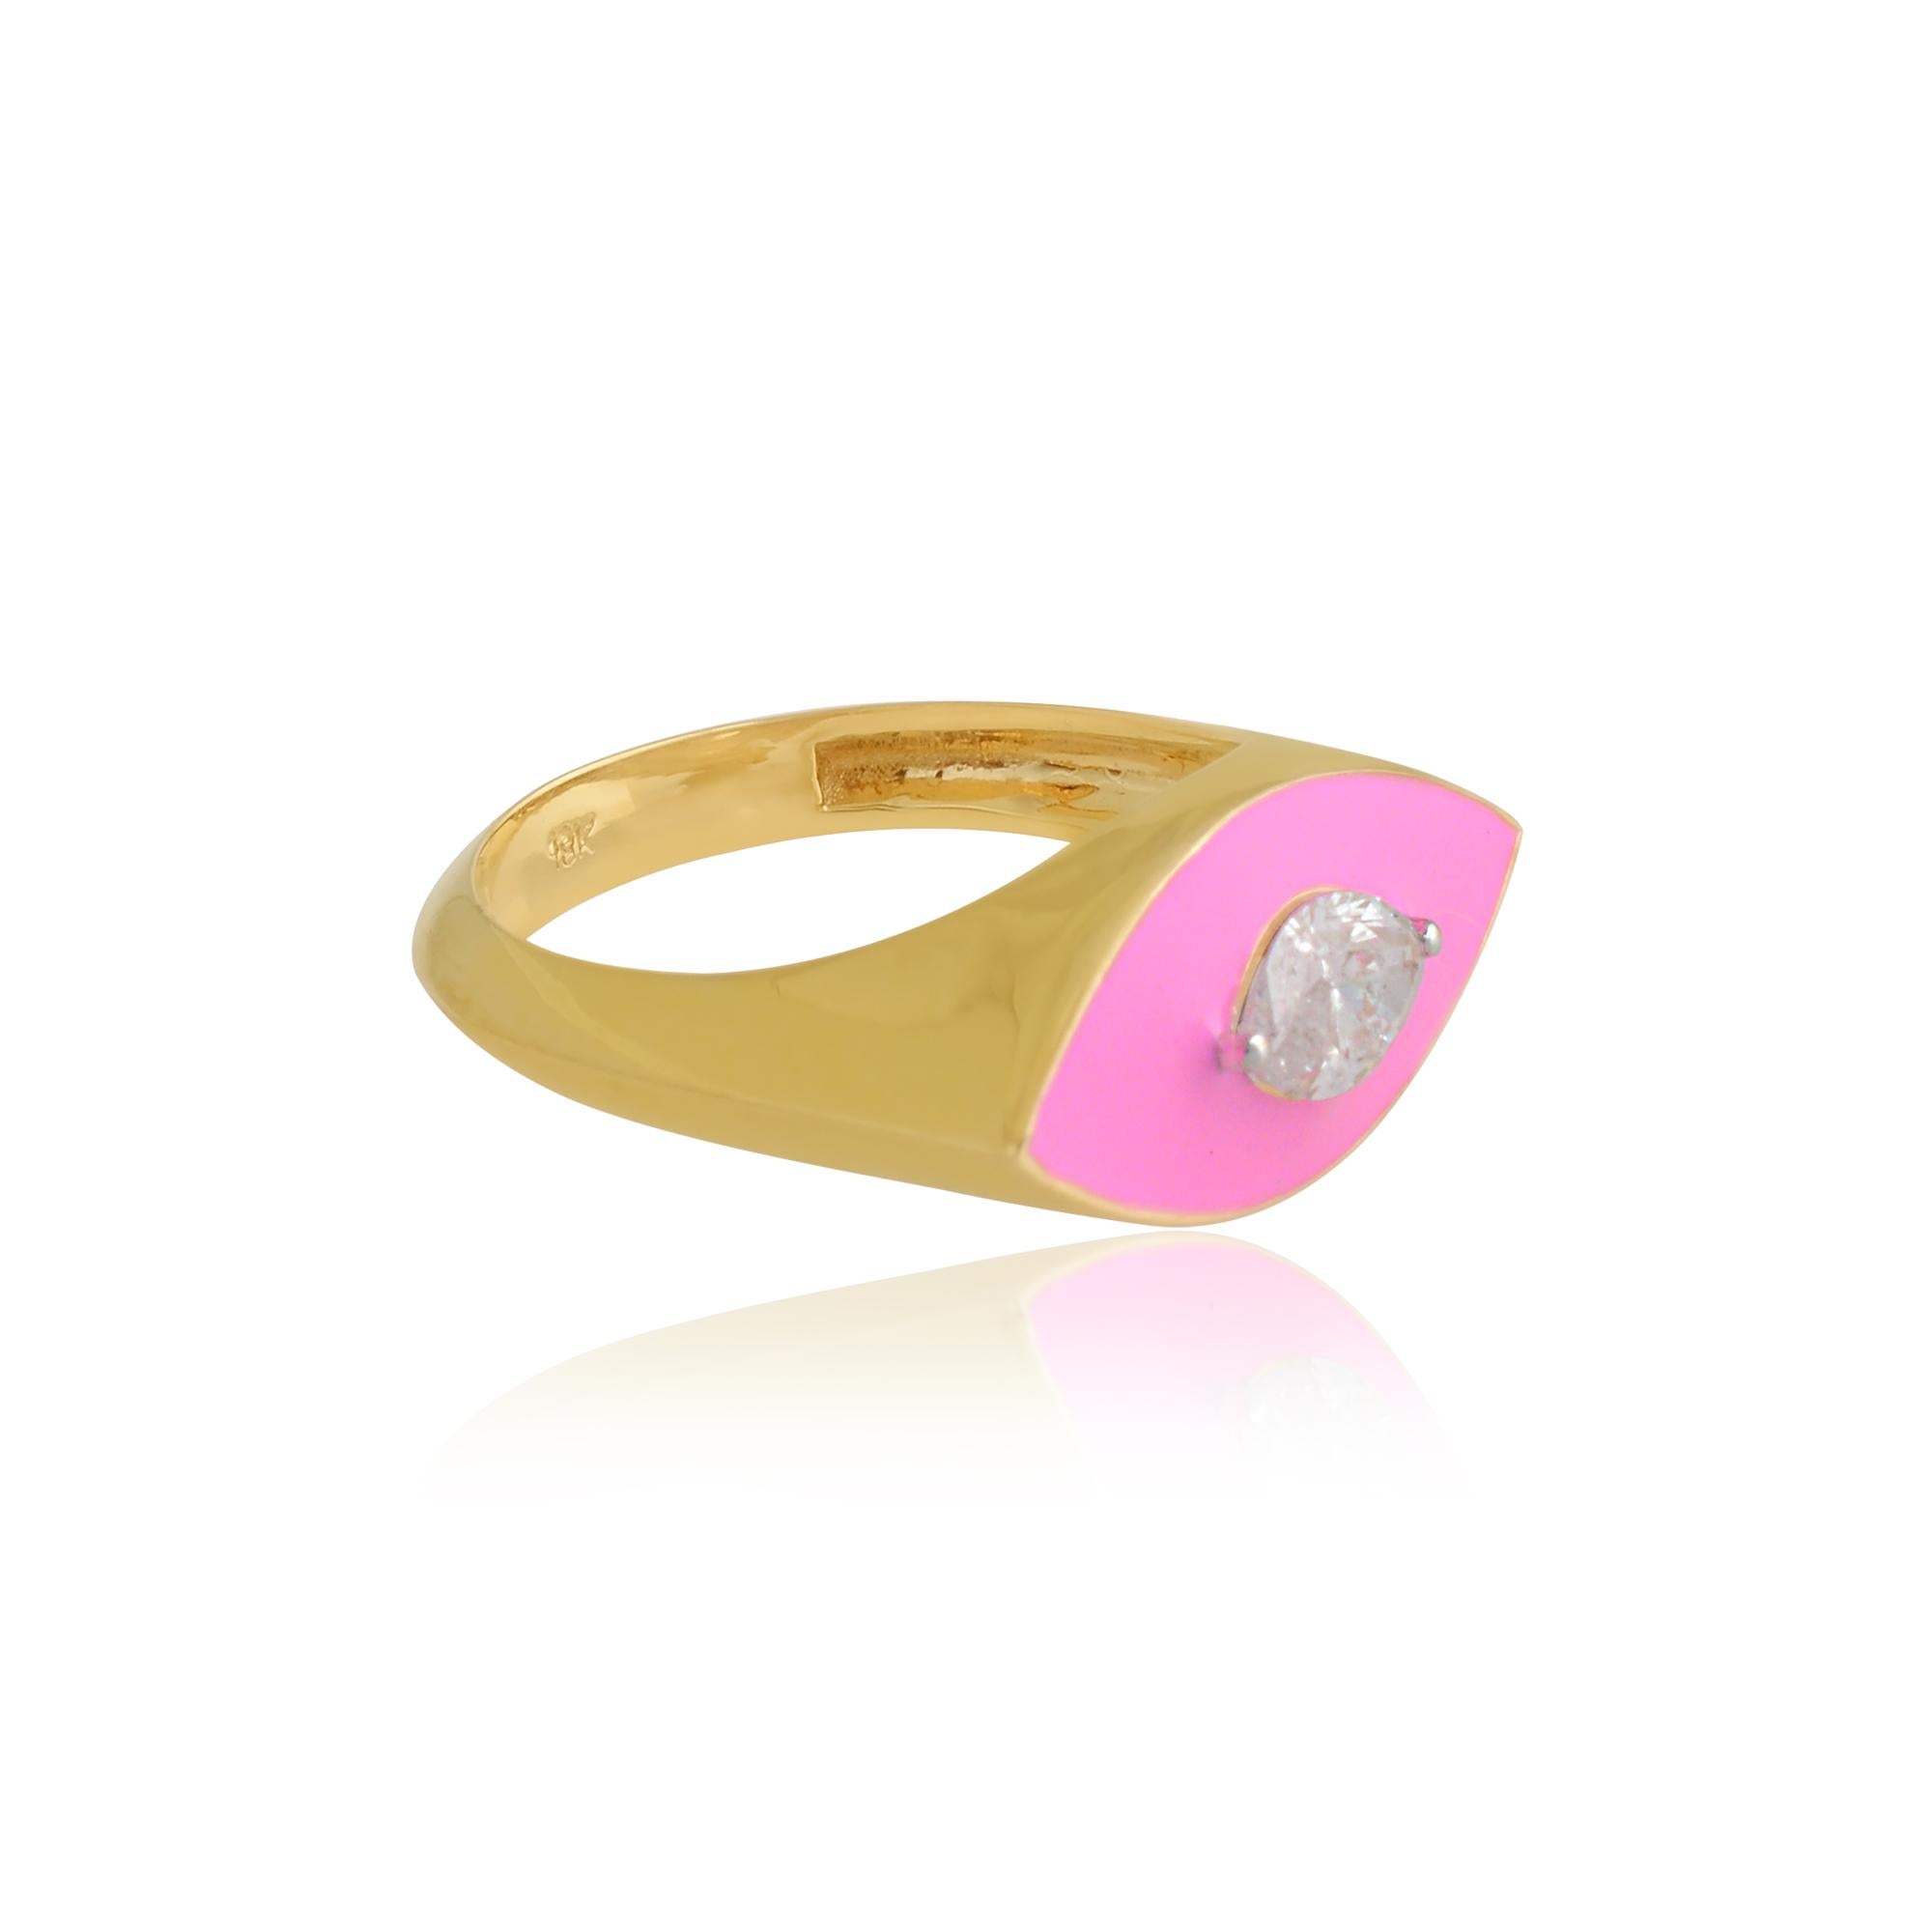 Marquise Cut 0.38 Carat Solitaire Diamond Evil Eye Ring 14k Yellow Gold Pink Enamel Jewelry For Sale